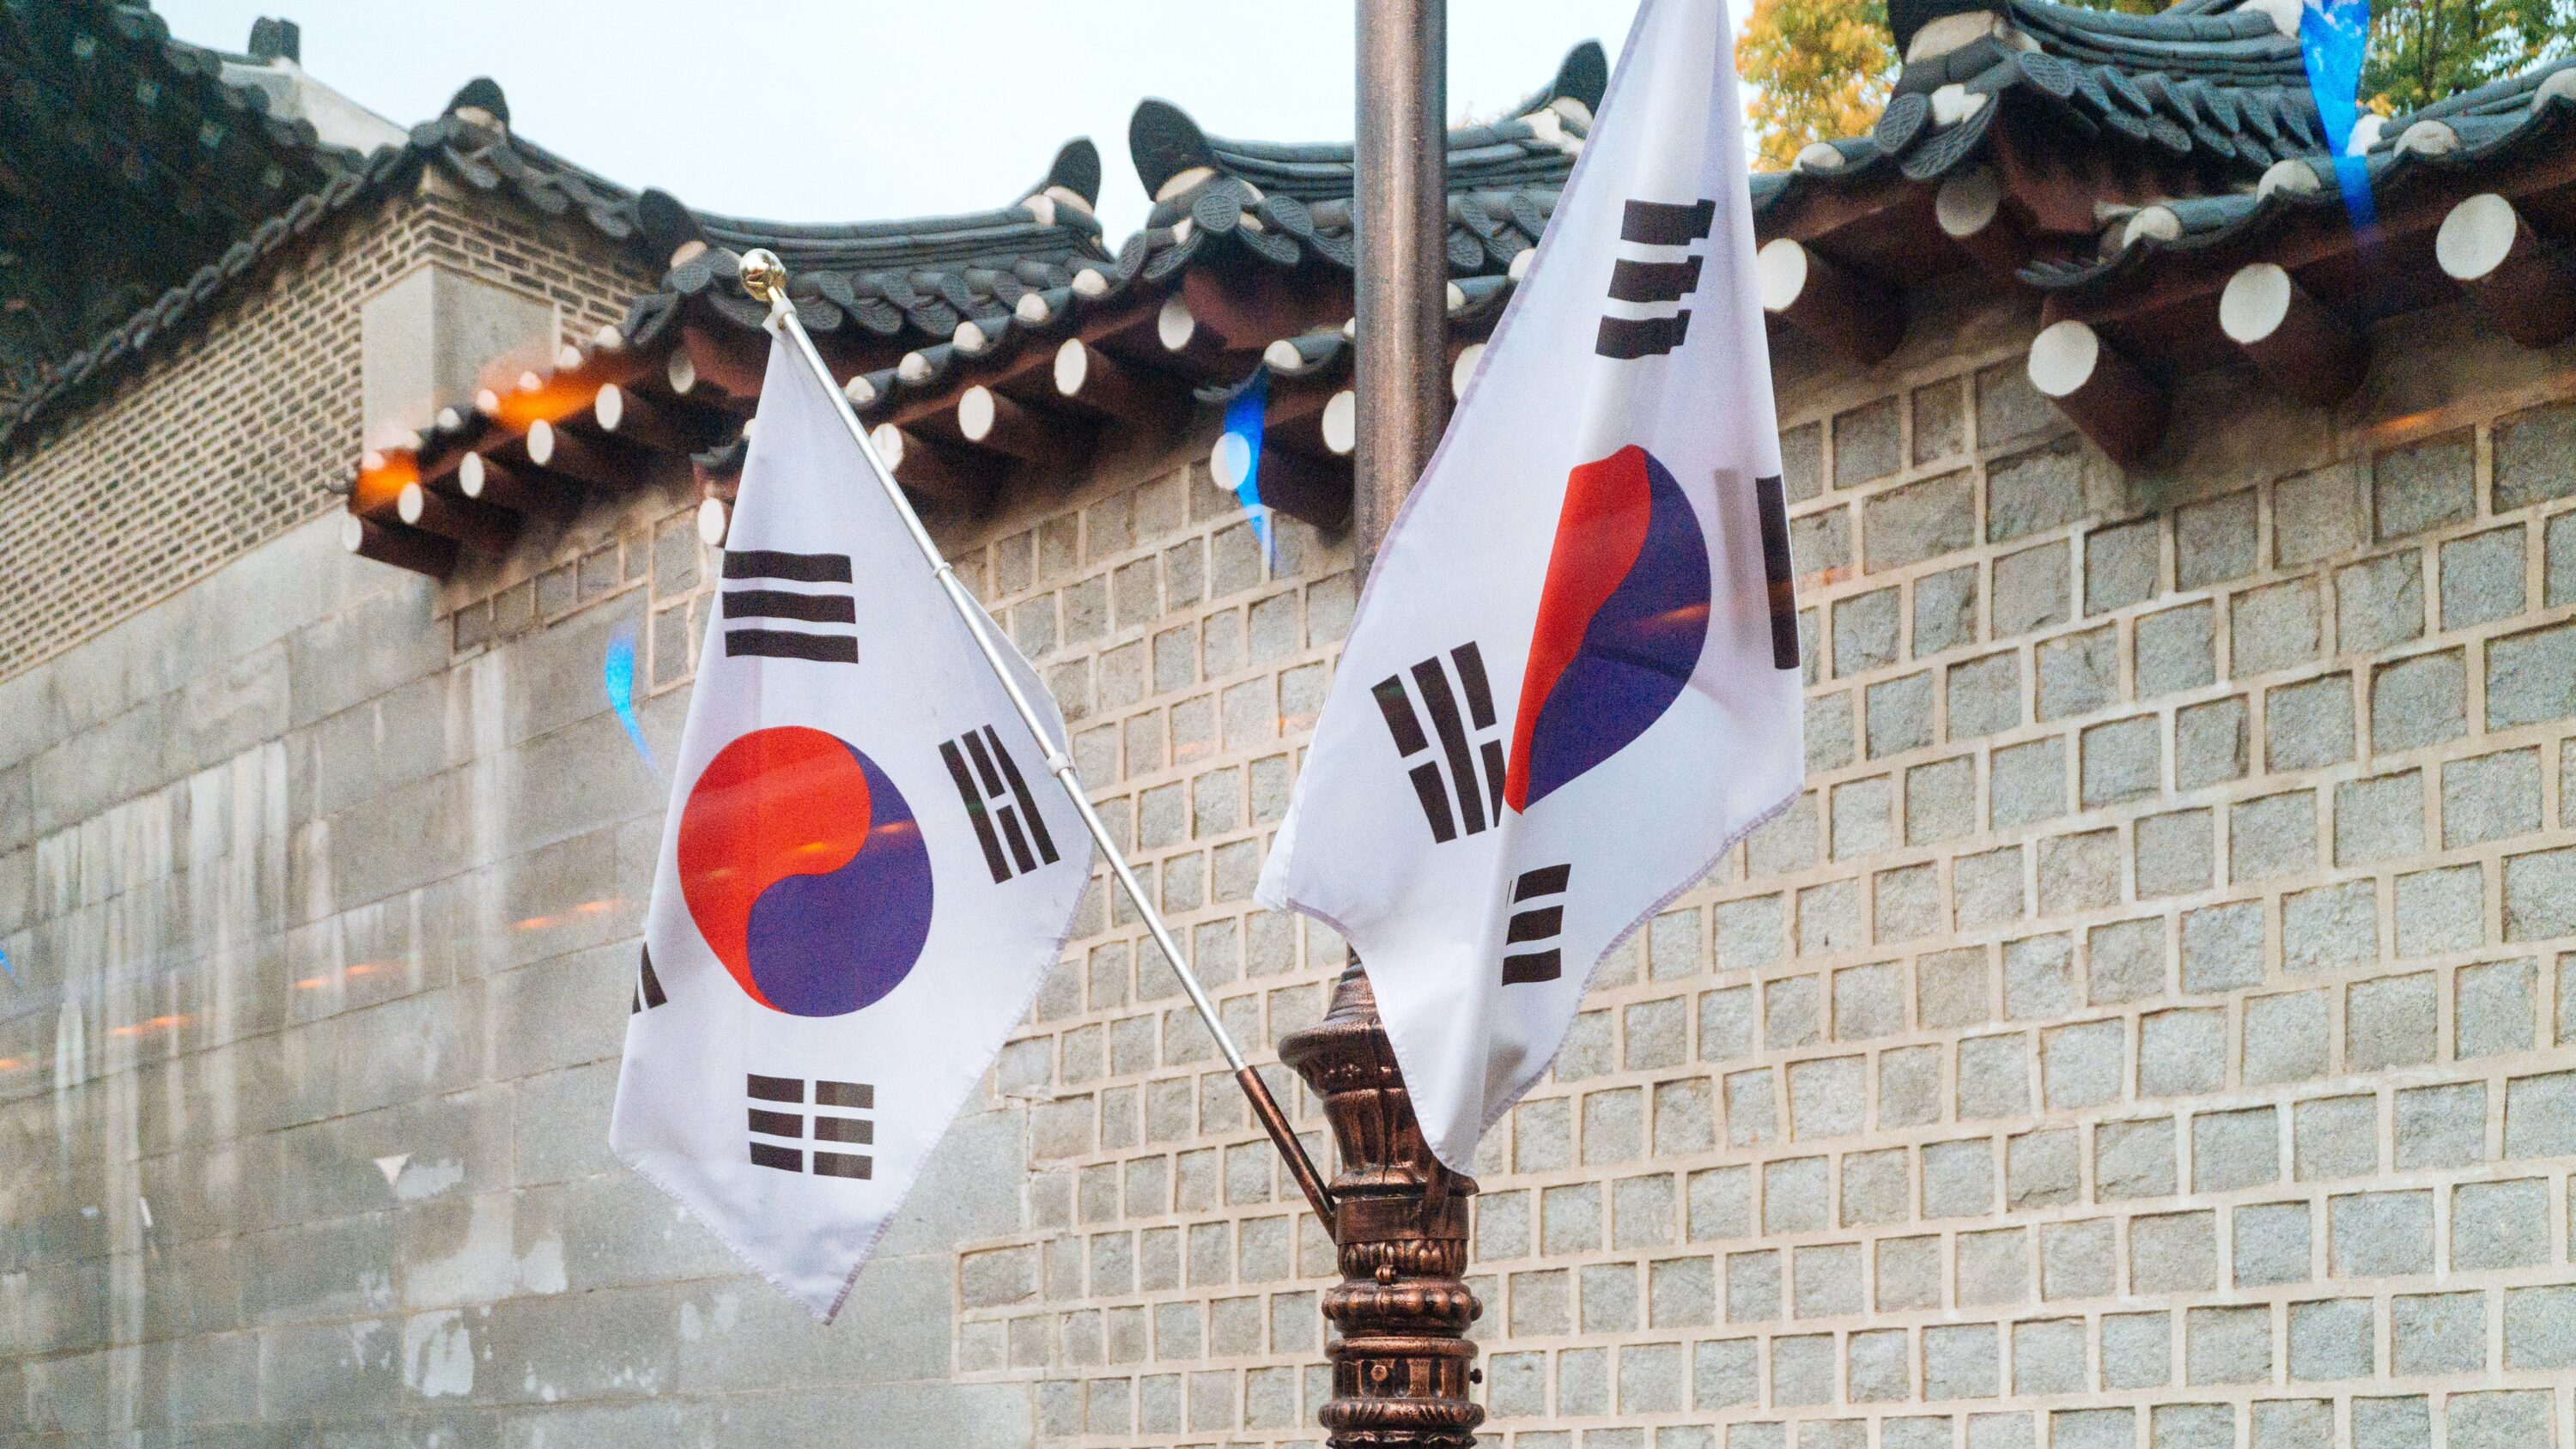 CryptoQuant finds South Korean traders to be behind recent altcoin rally